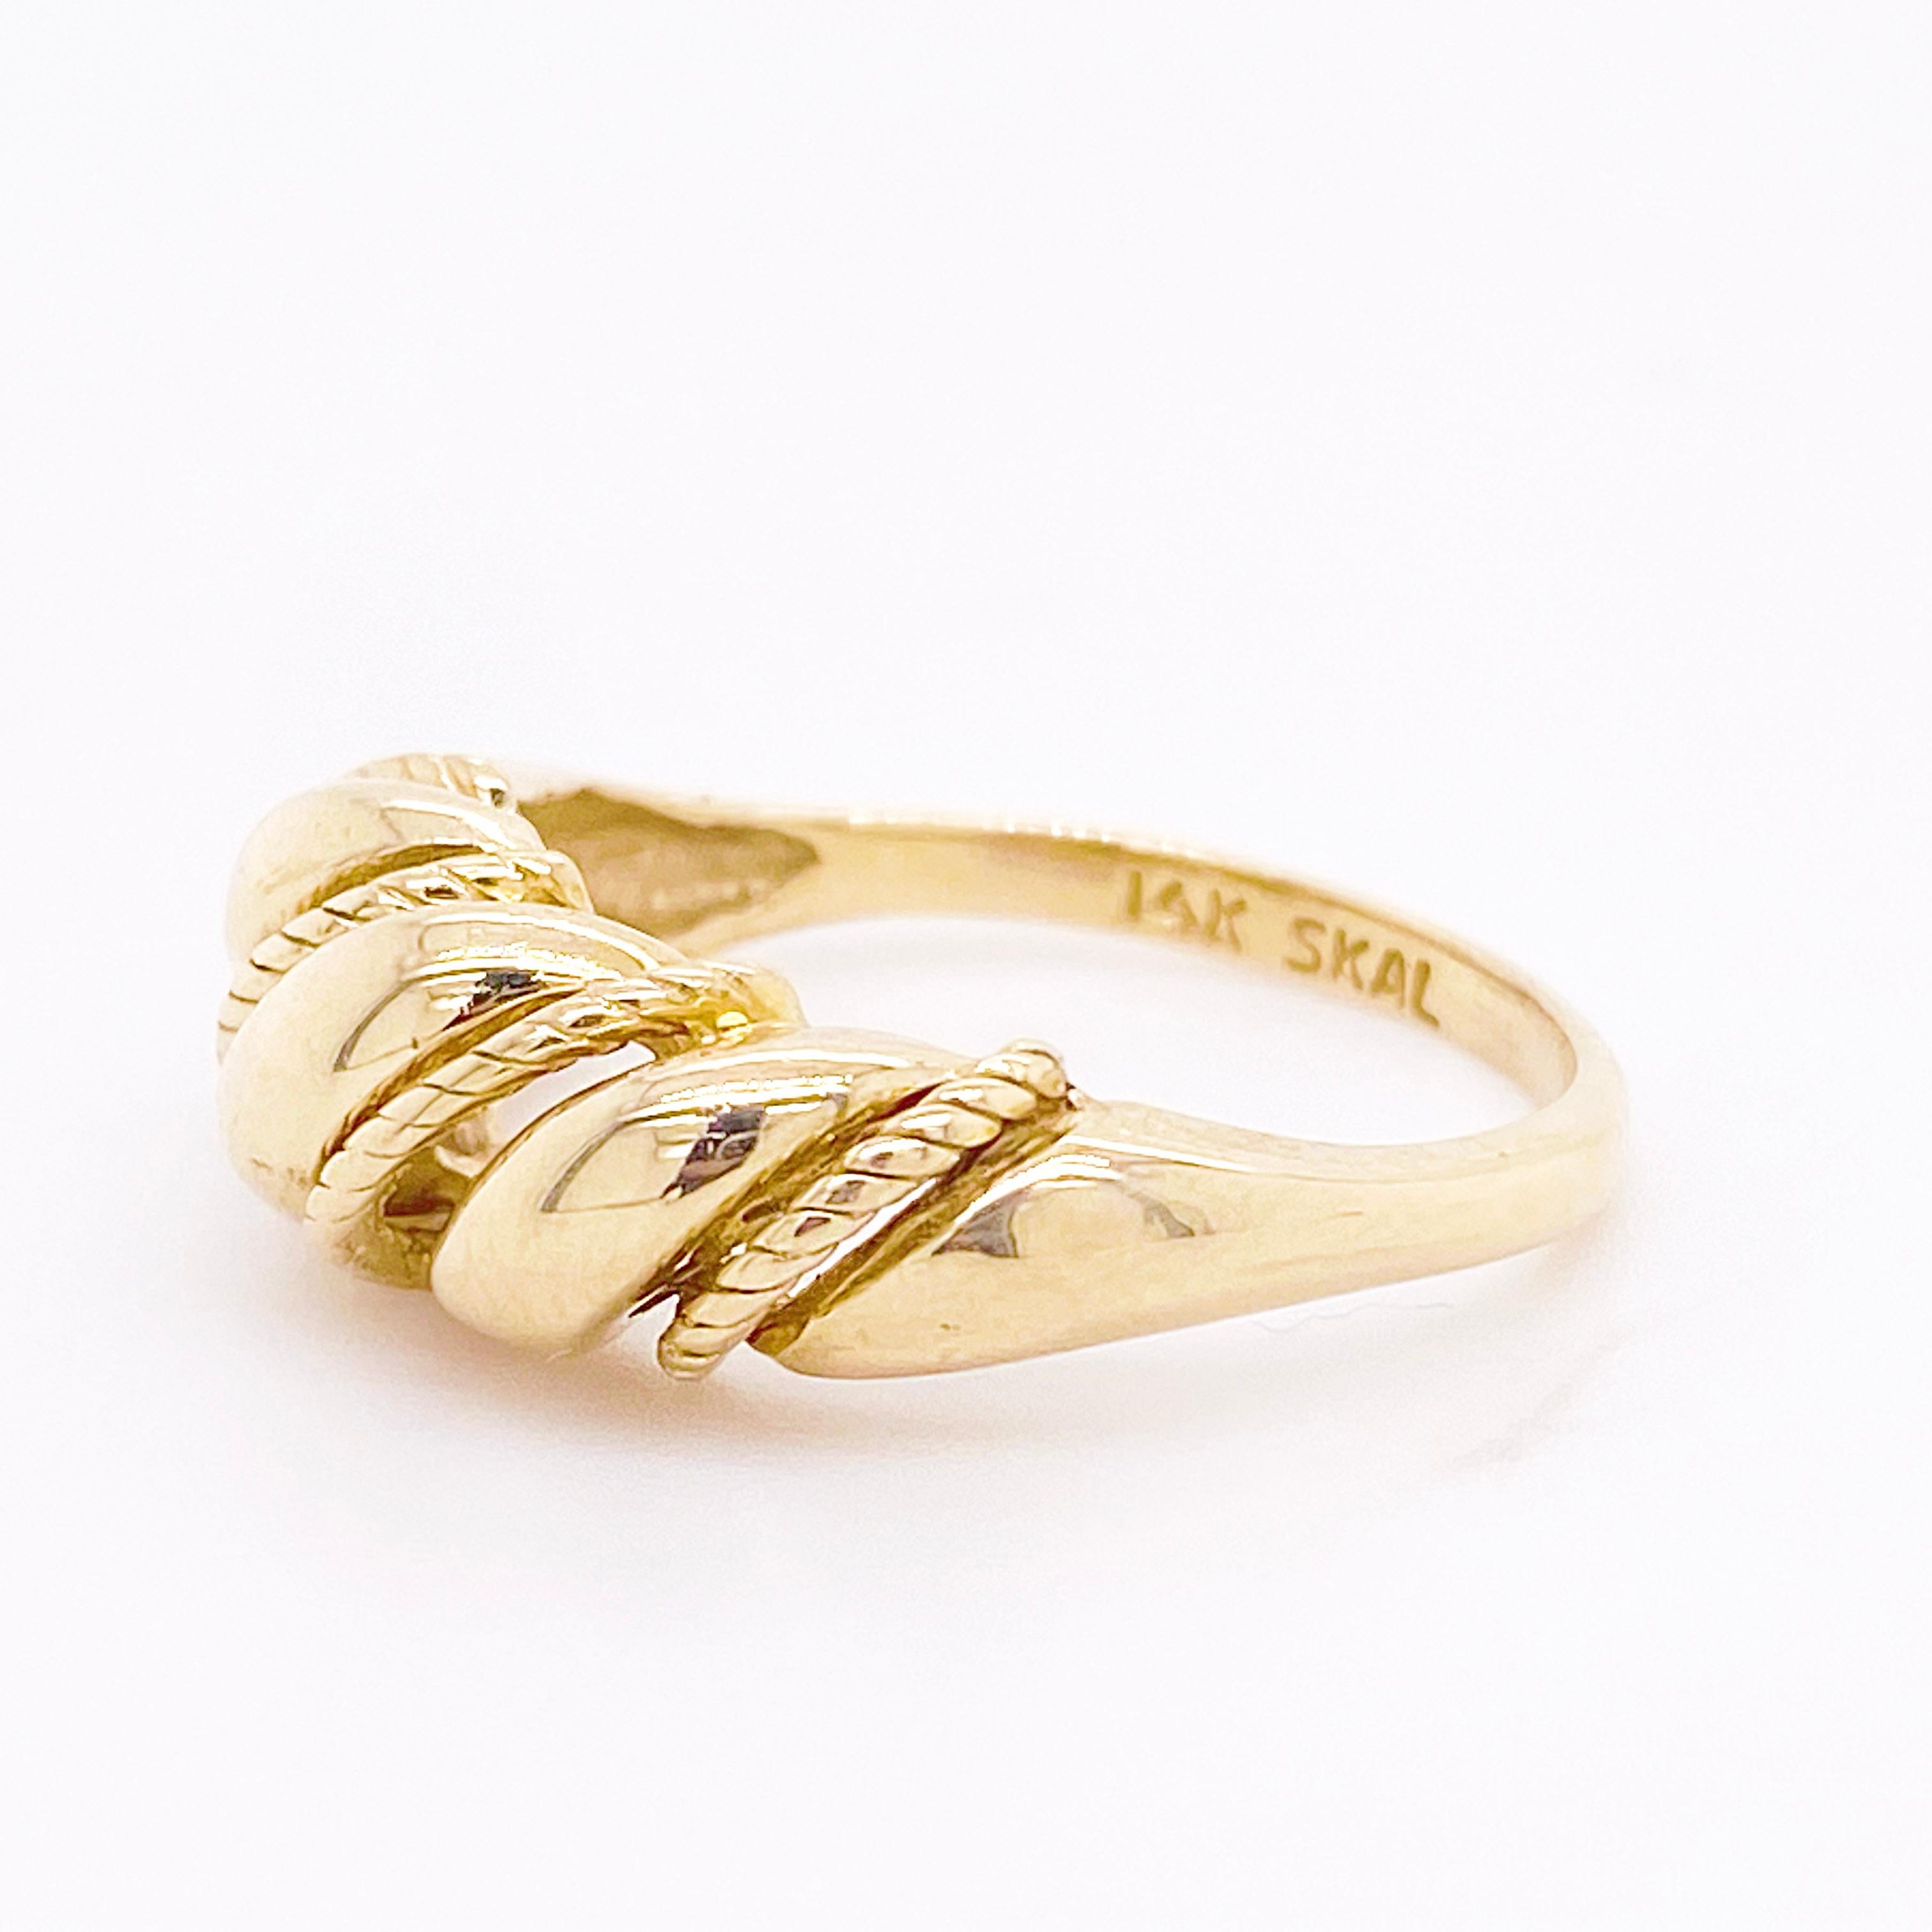 This dome ring in 14 karat solid yellow gold is one of the most basic of a jewelry wardrobe. It can be worn on any finger and looks great paired with almost any other ring. The details for this beautiful ring are listed below:
Metal Quality: 14